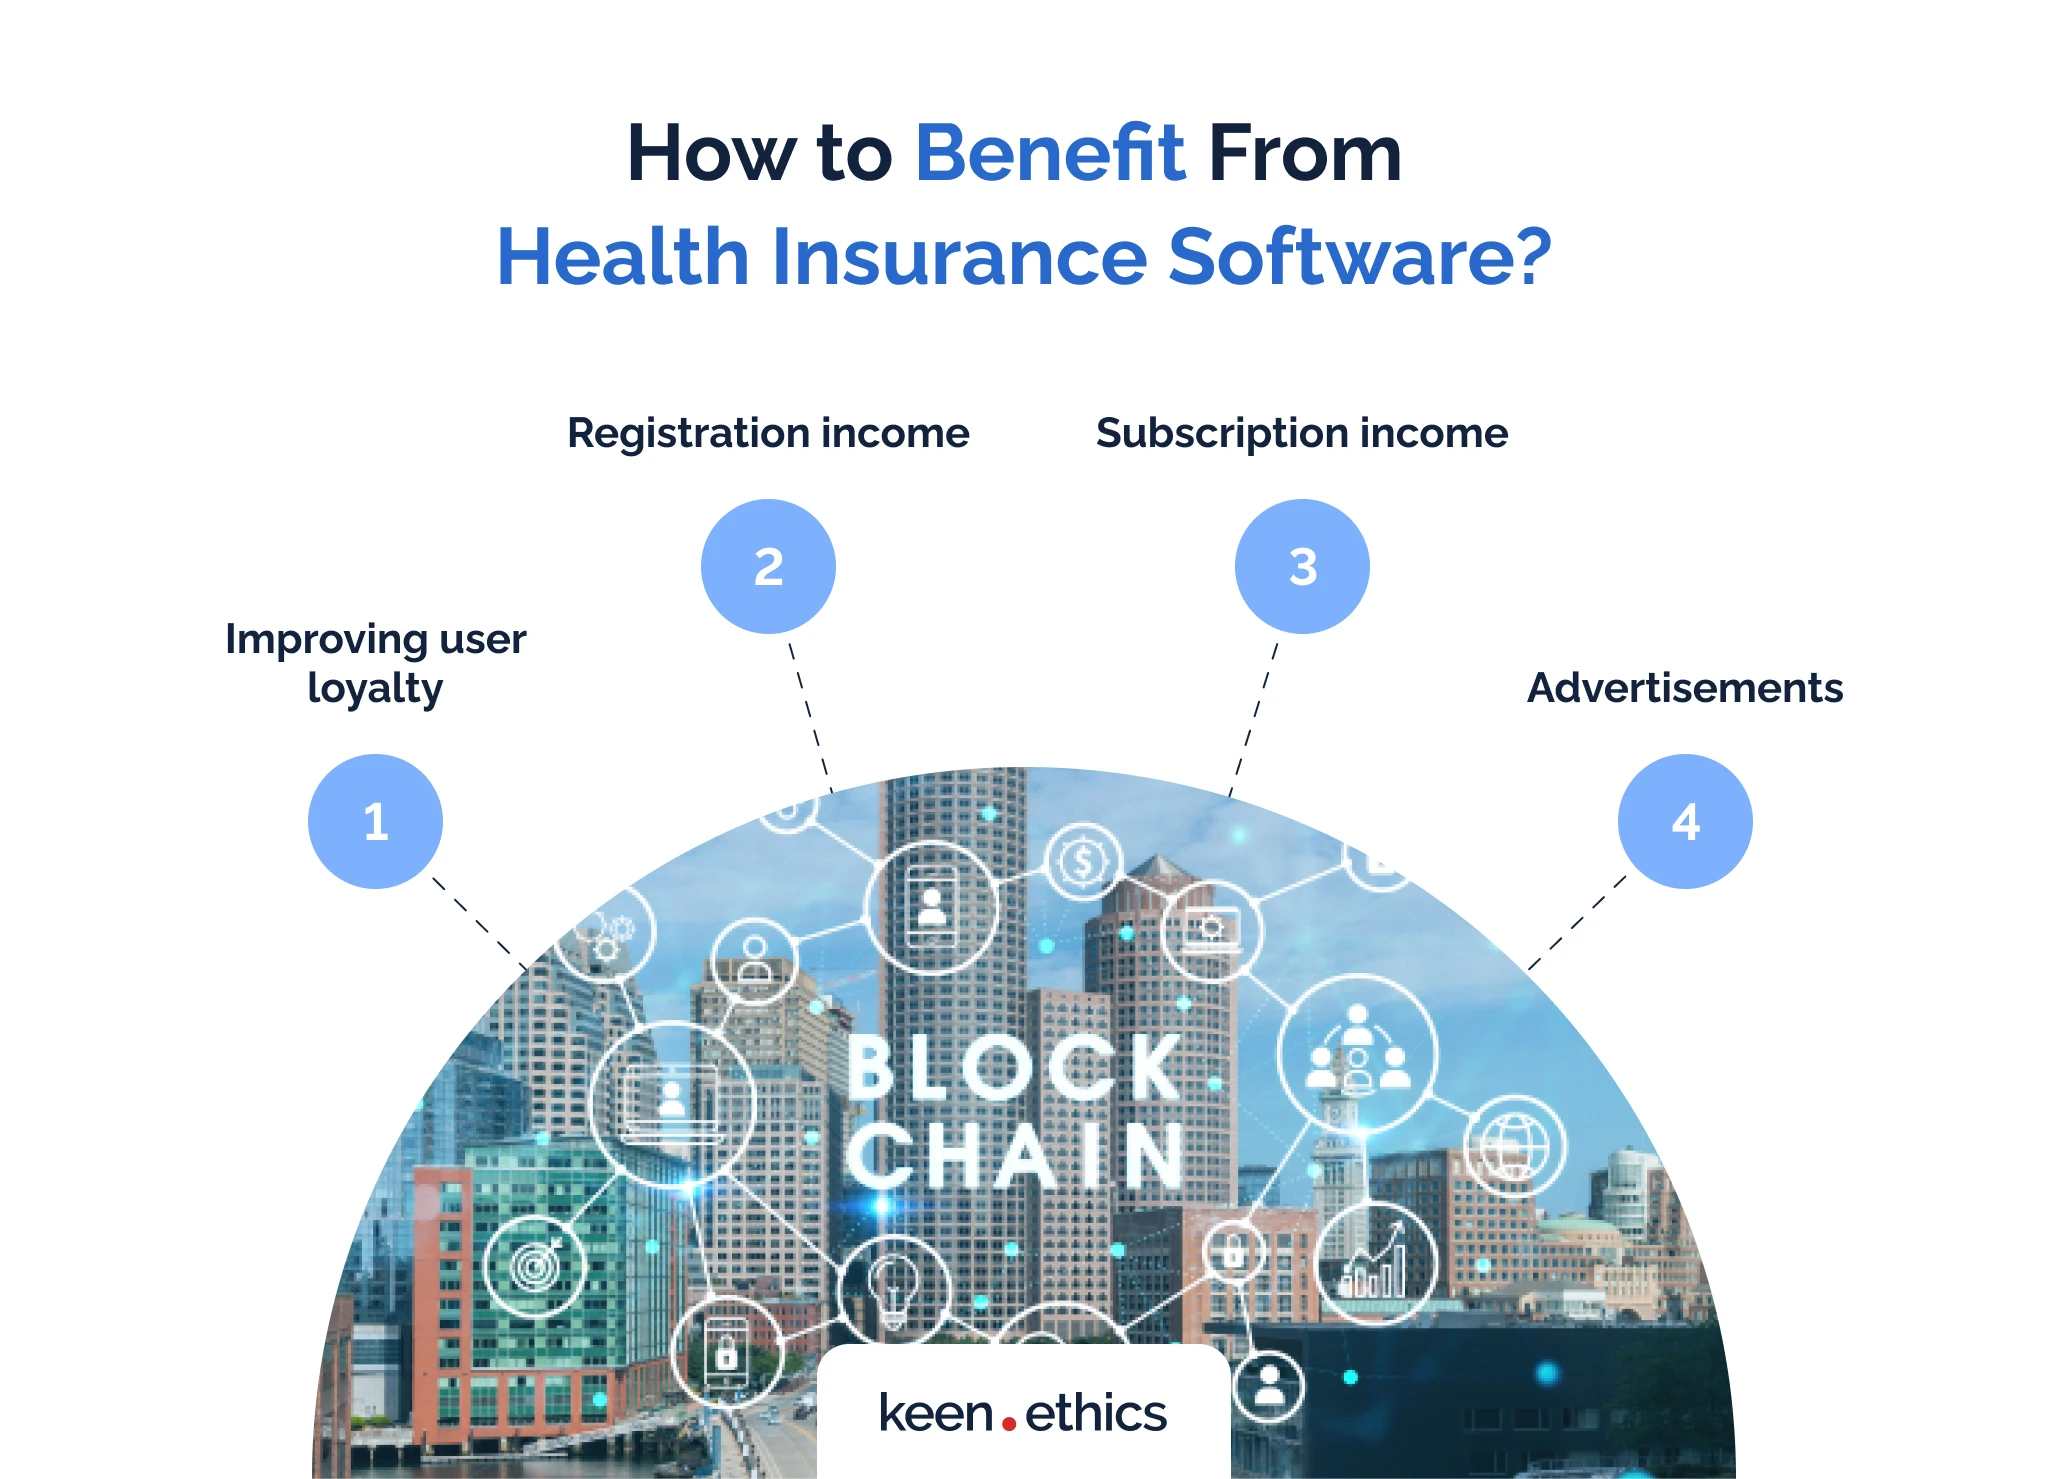 How to benefit from health insurance software